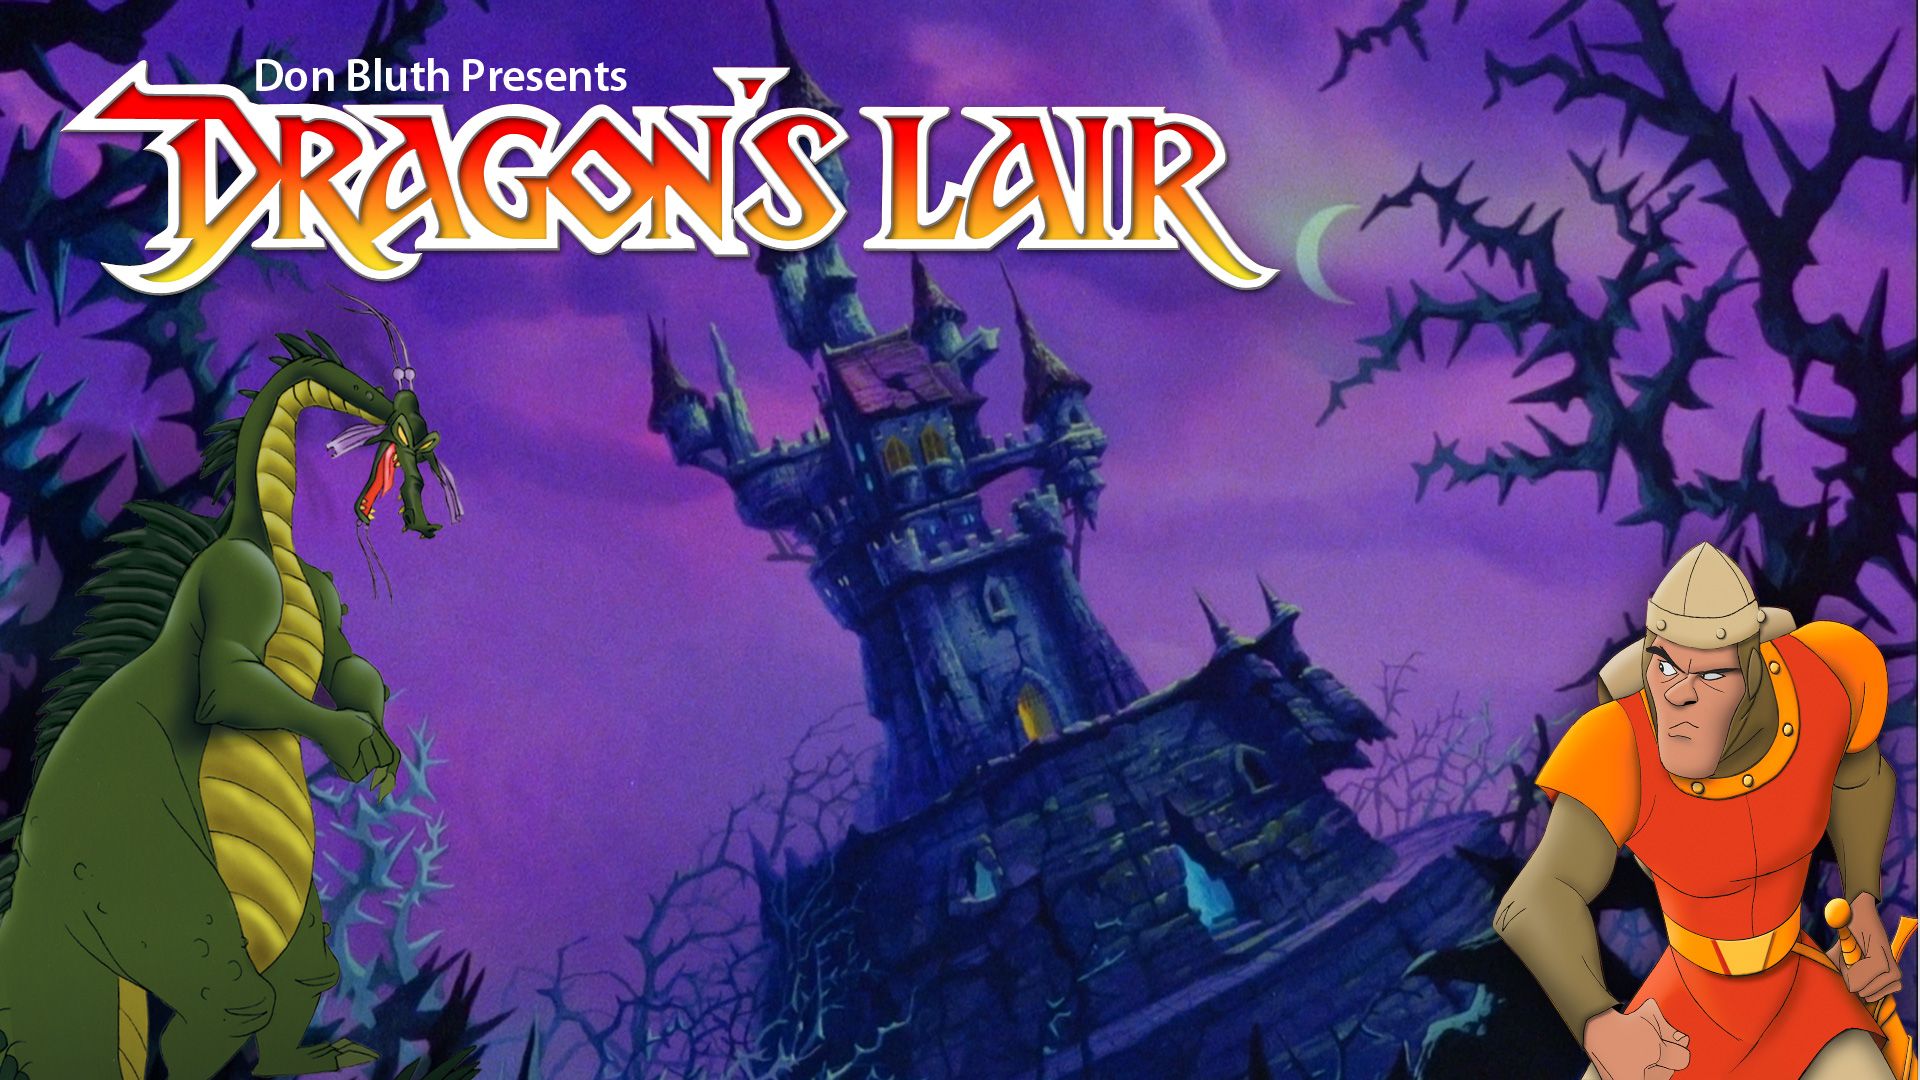 Let’s Play Dragon’s Lair (Steam)